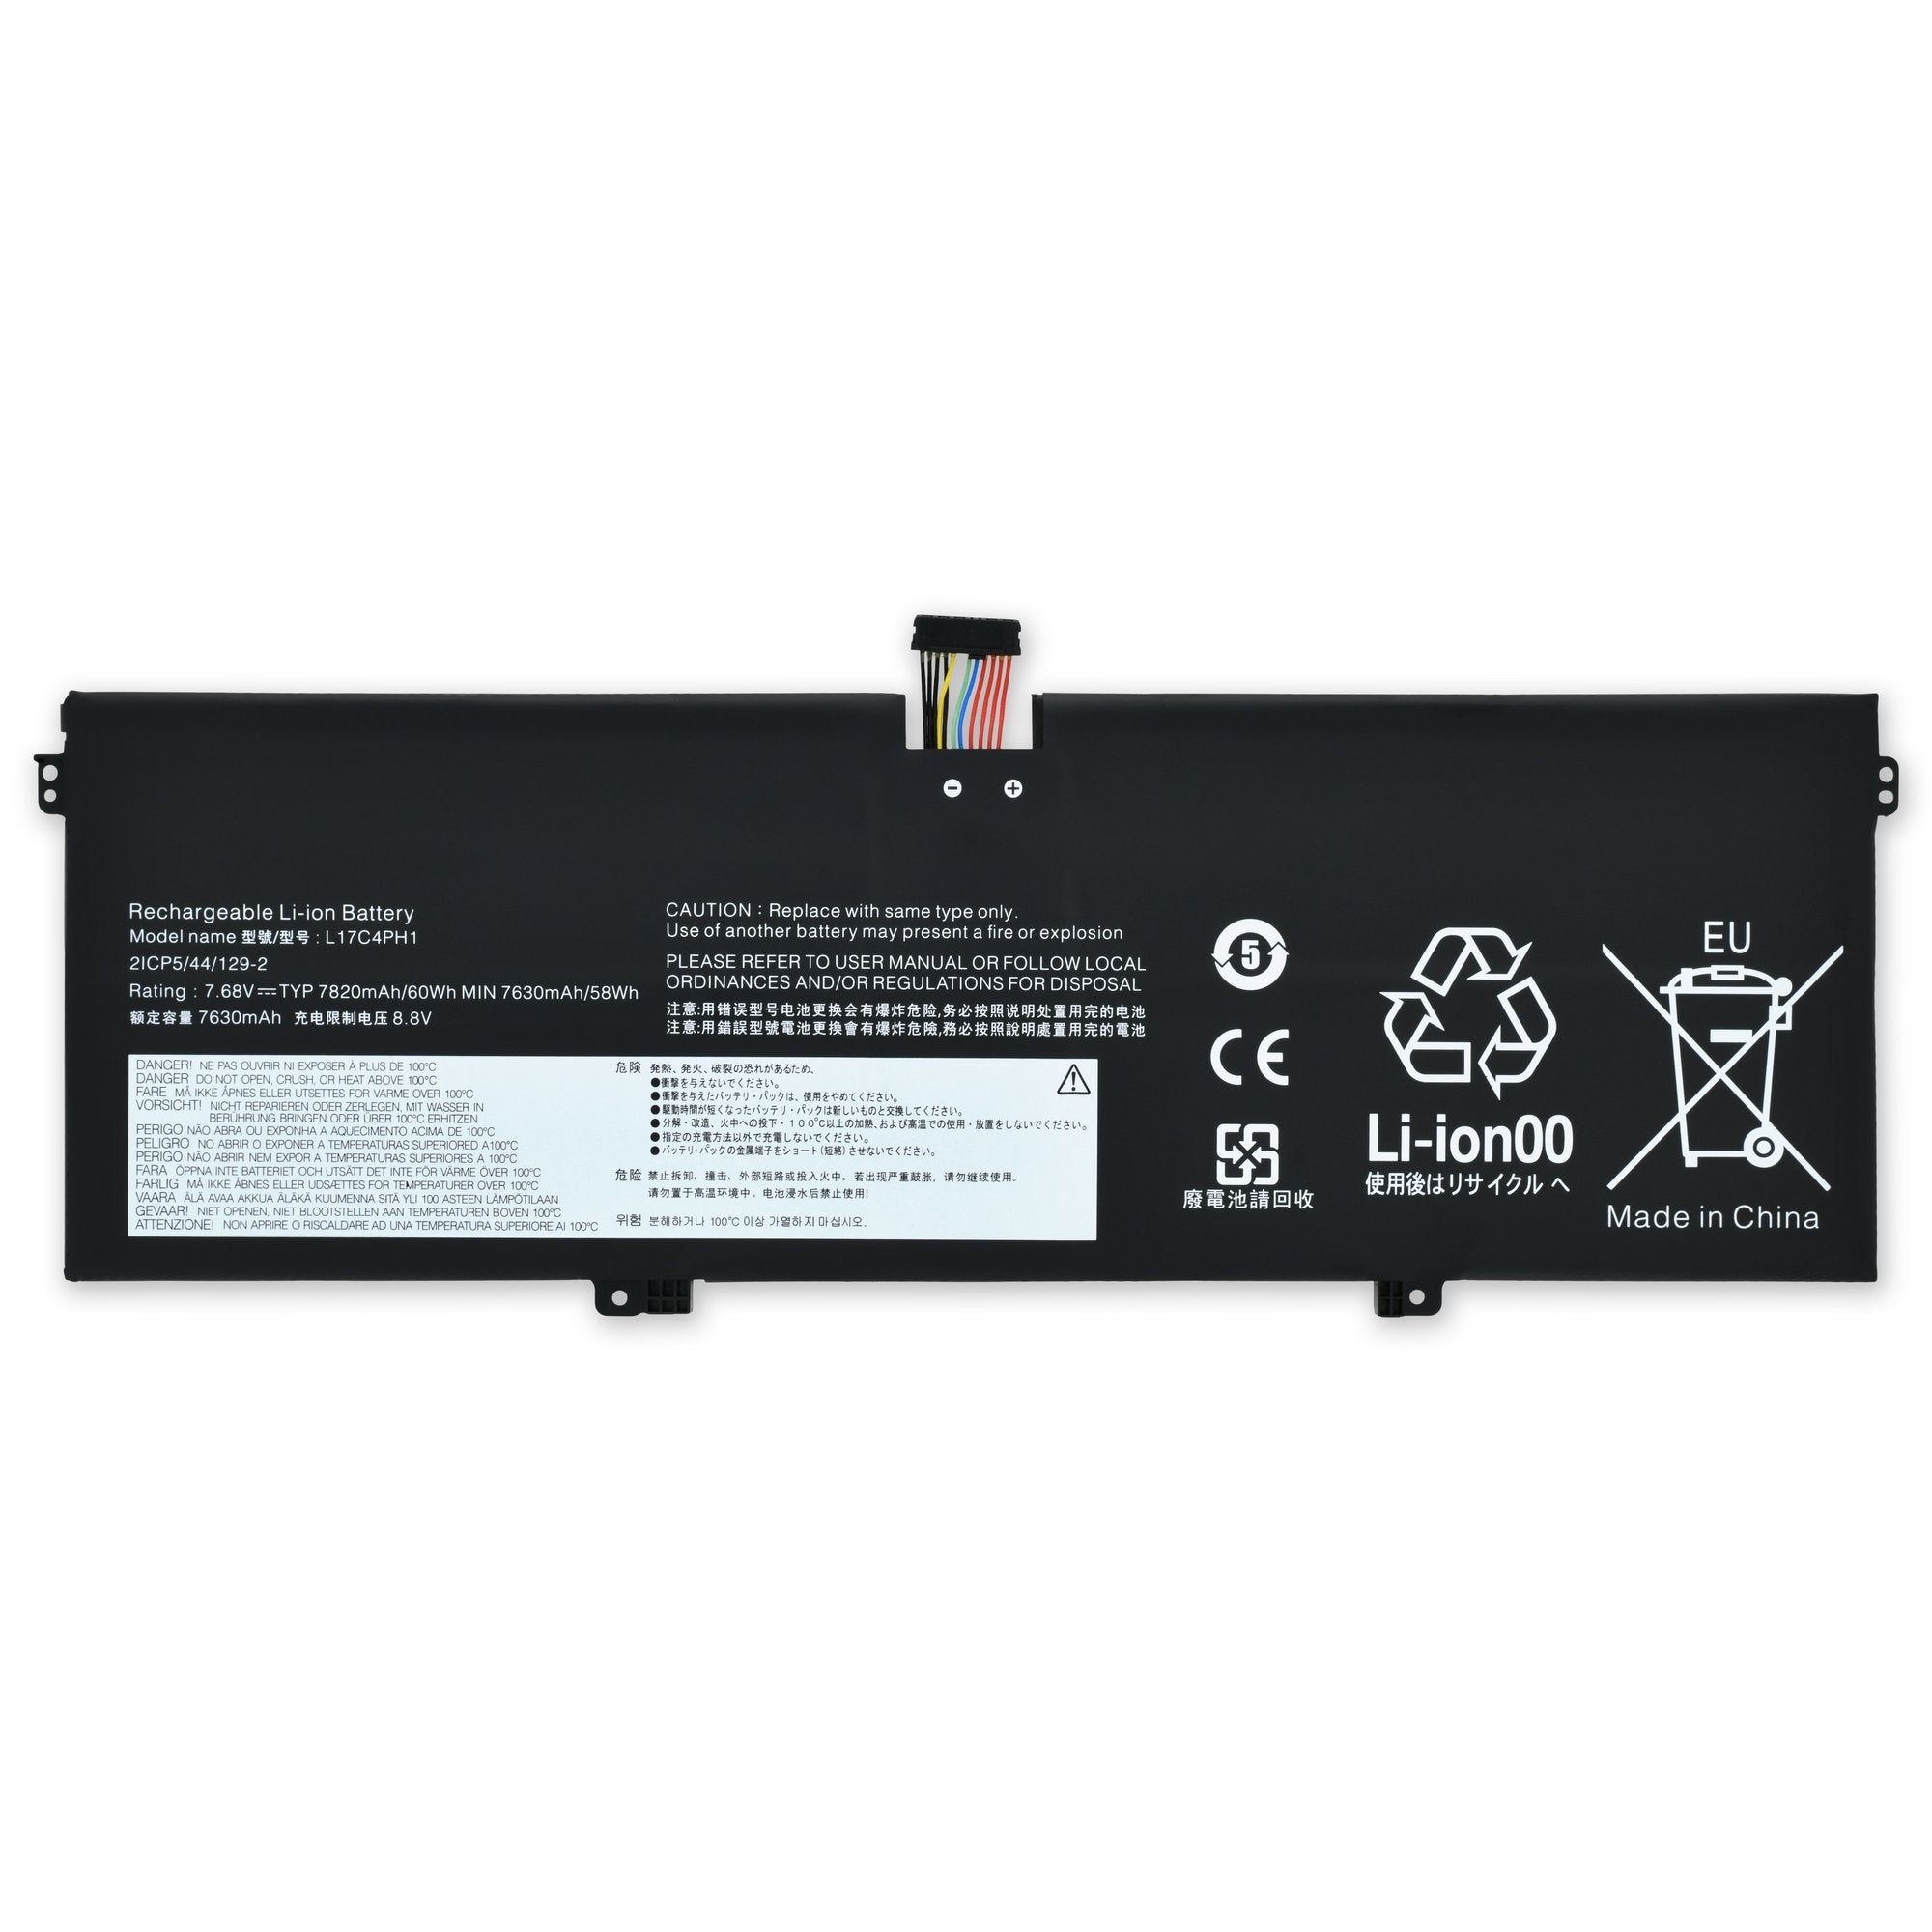 Lenovo C930-13IKB Battery New Part Only